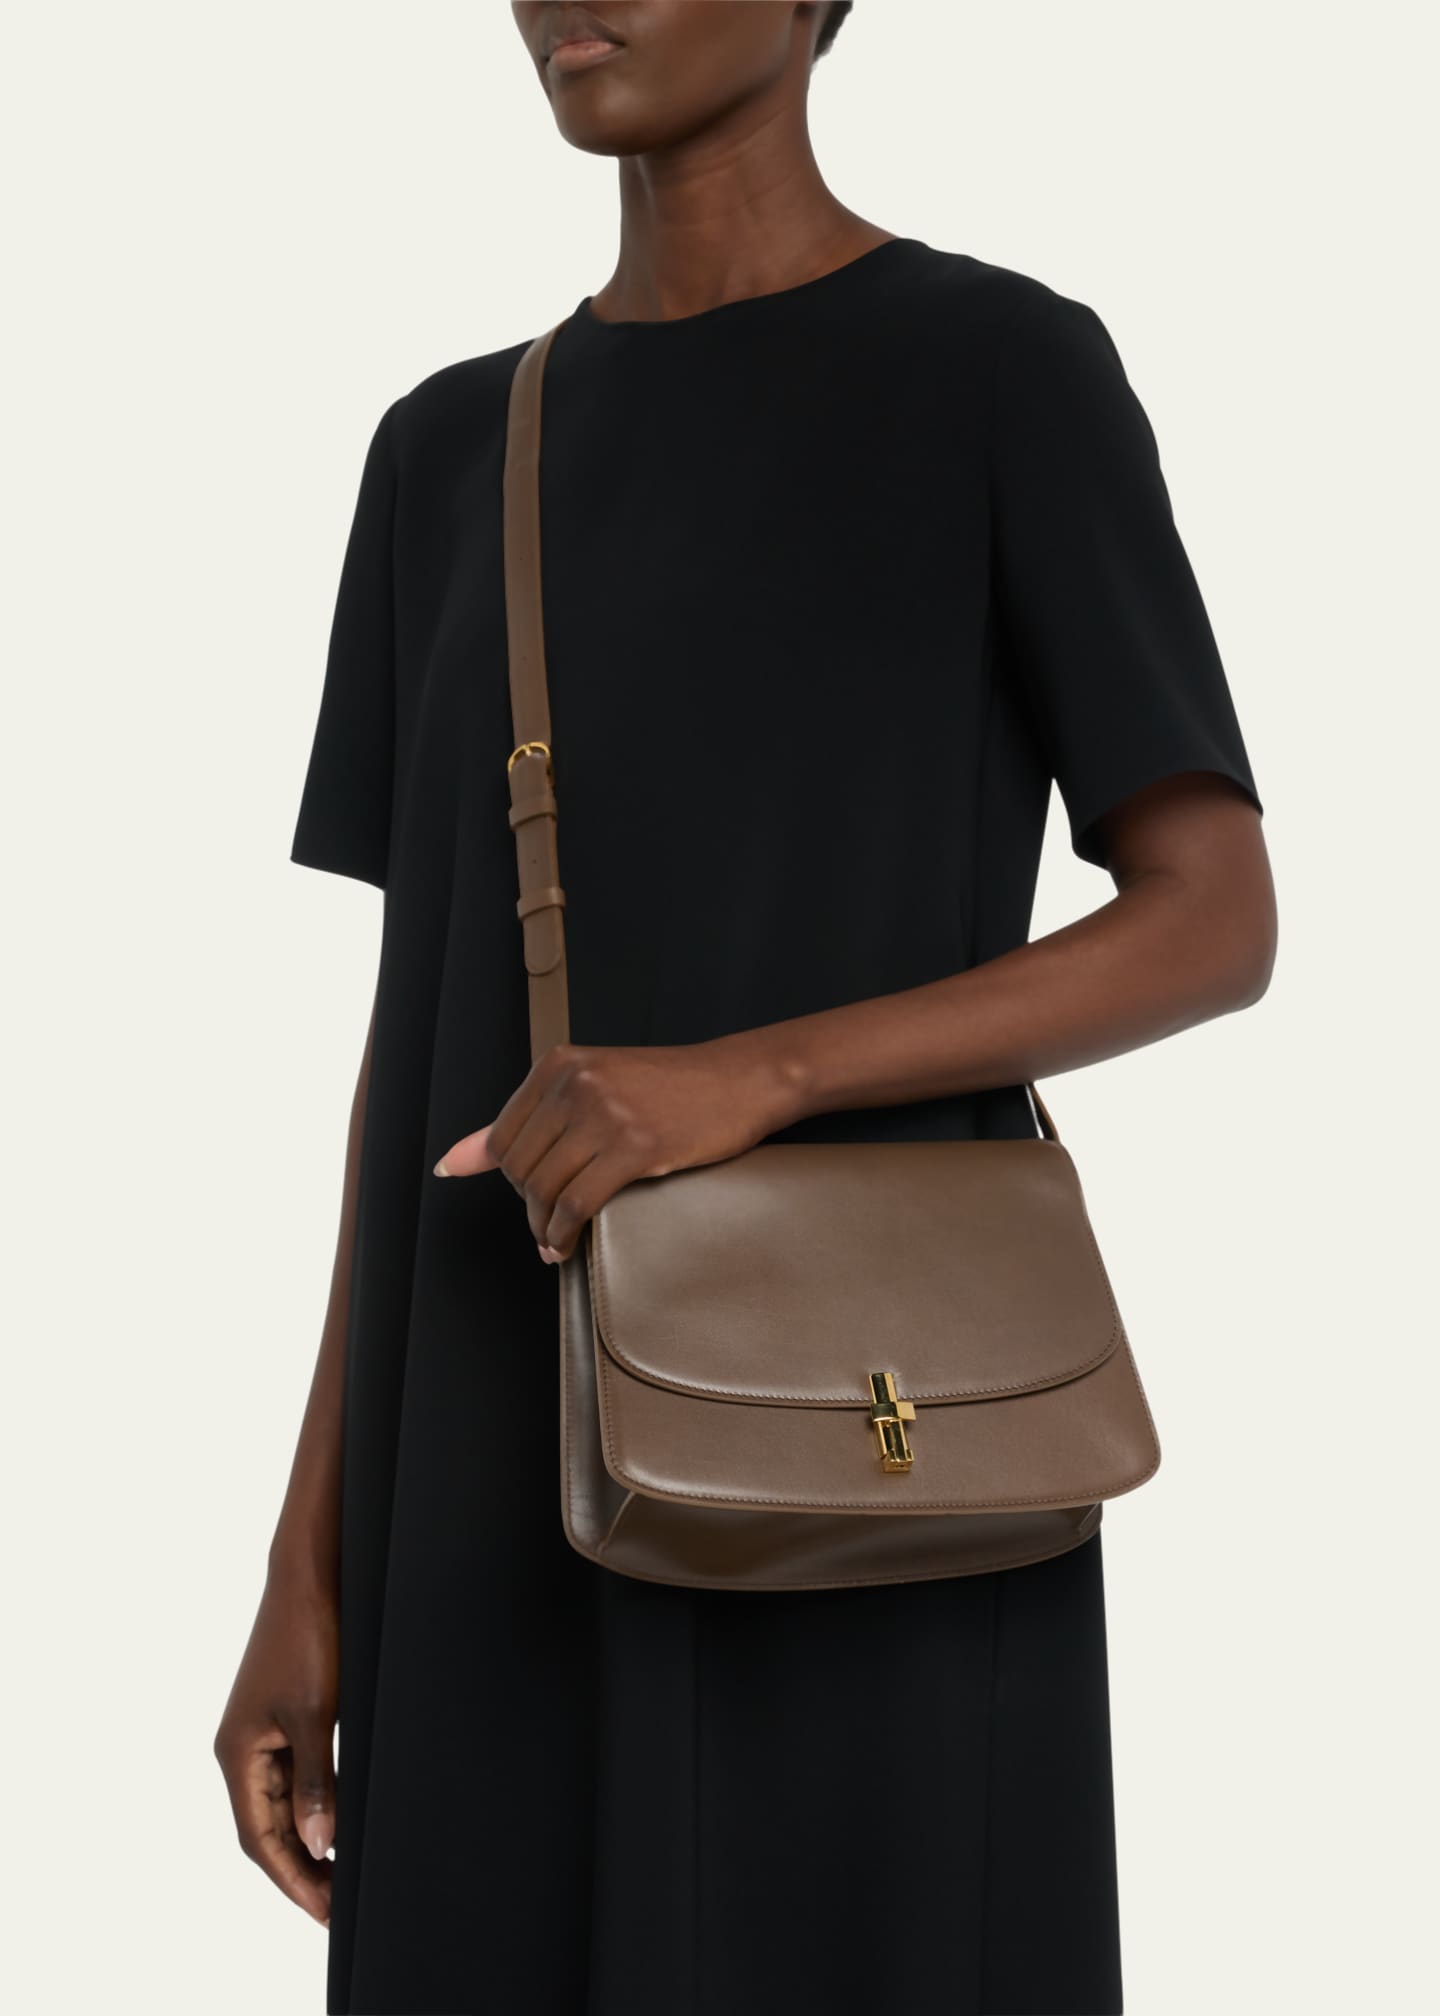 E W Sofia Leather Shoulder Bag in Brown - The Row